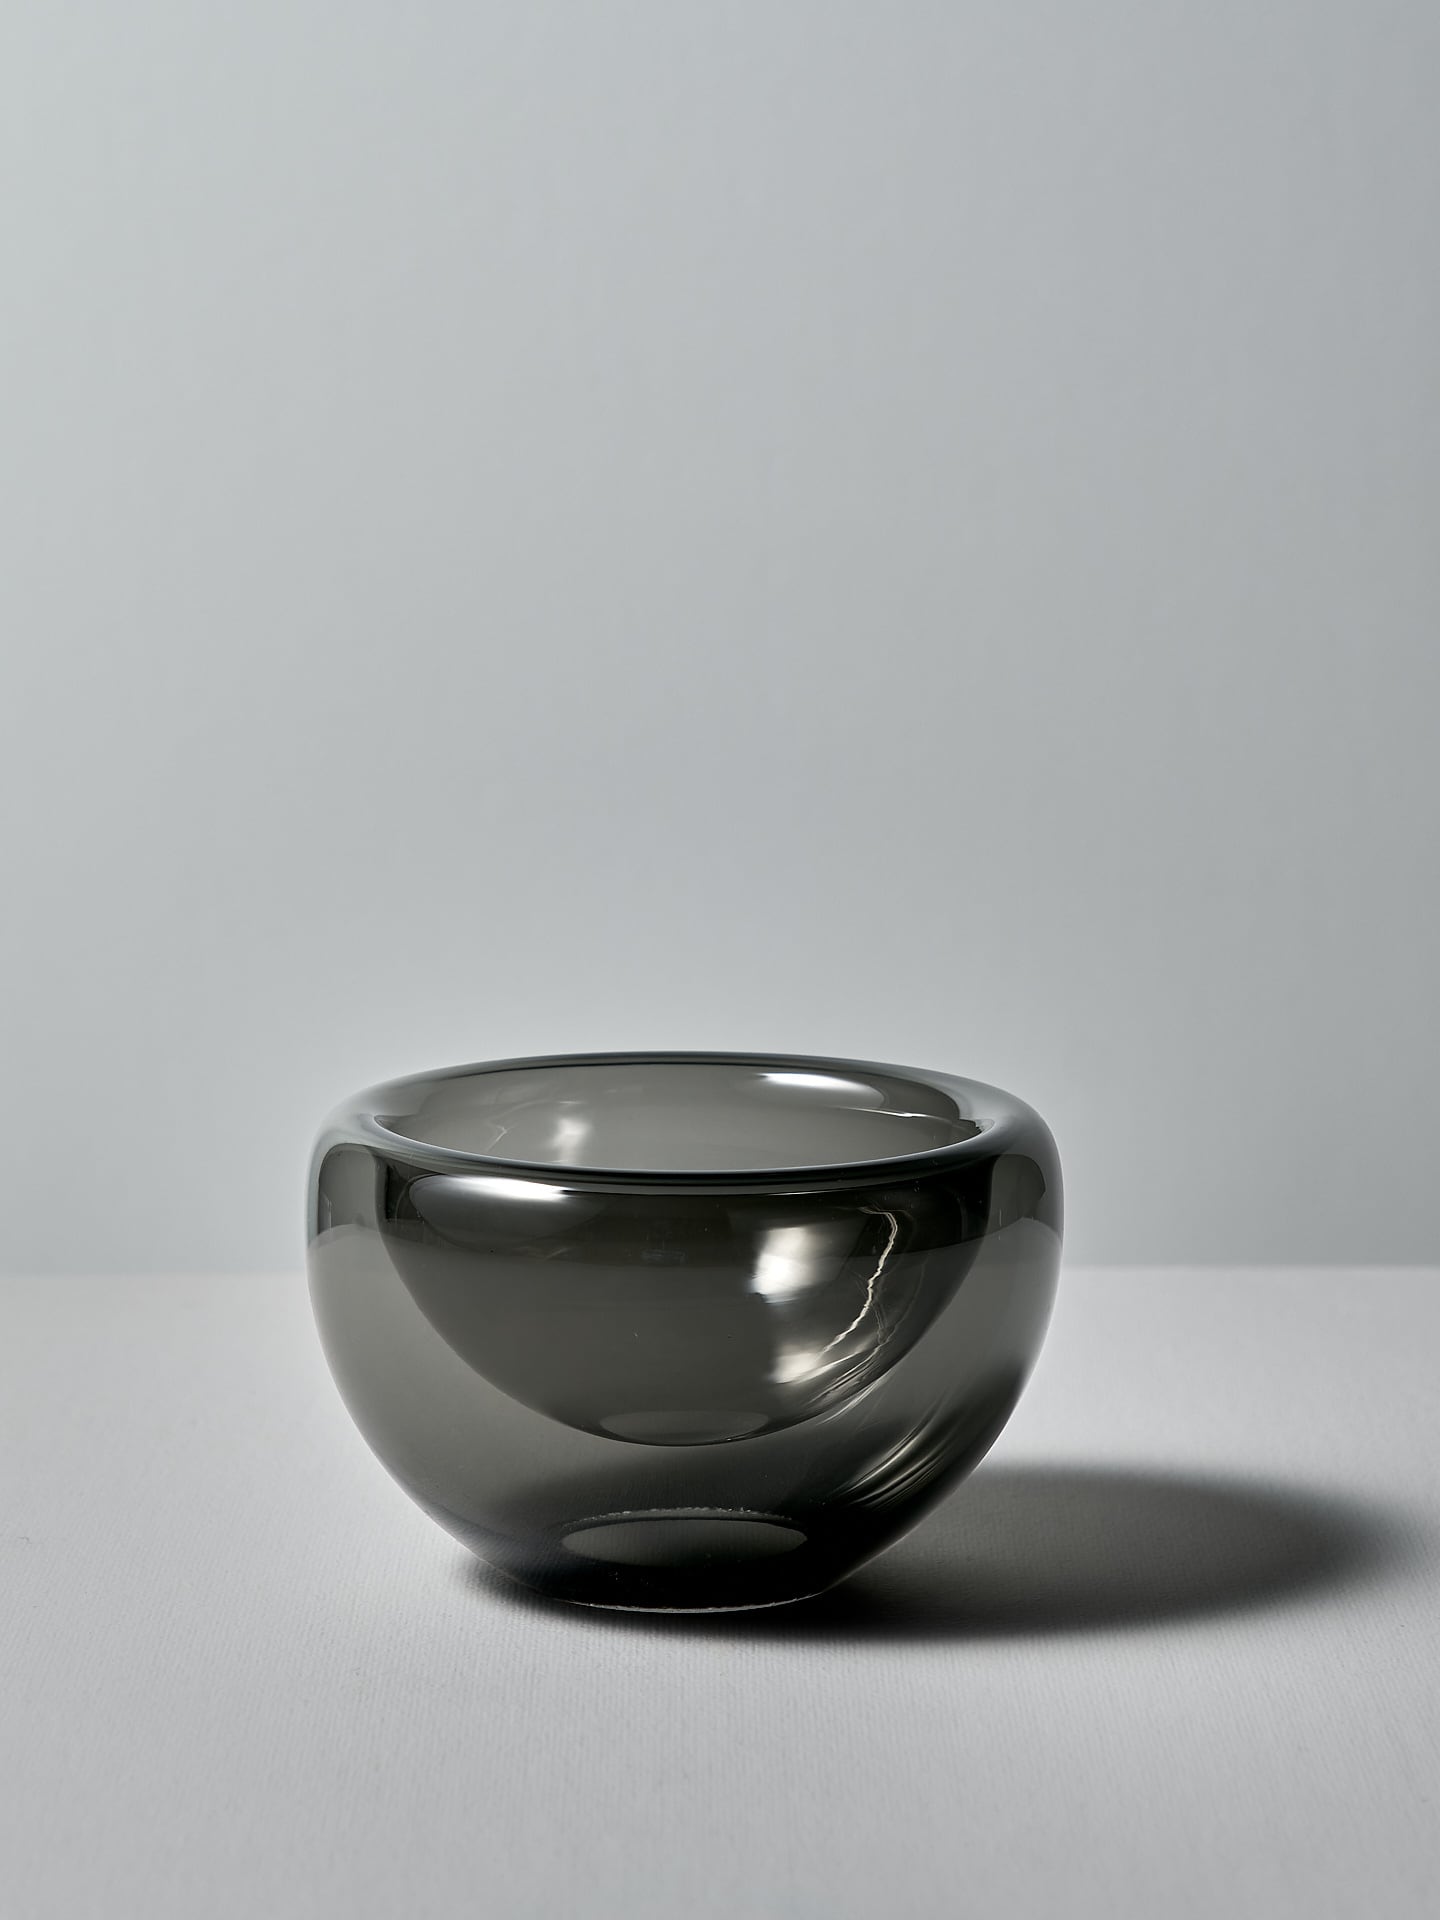 A Mini Fulvio Glass Bowl - Grey made by Matthew Hall sitting on a white table.